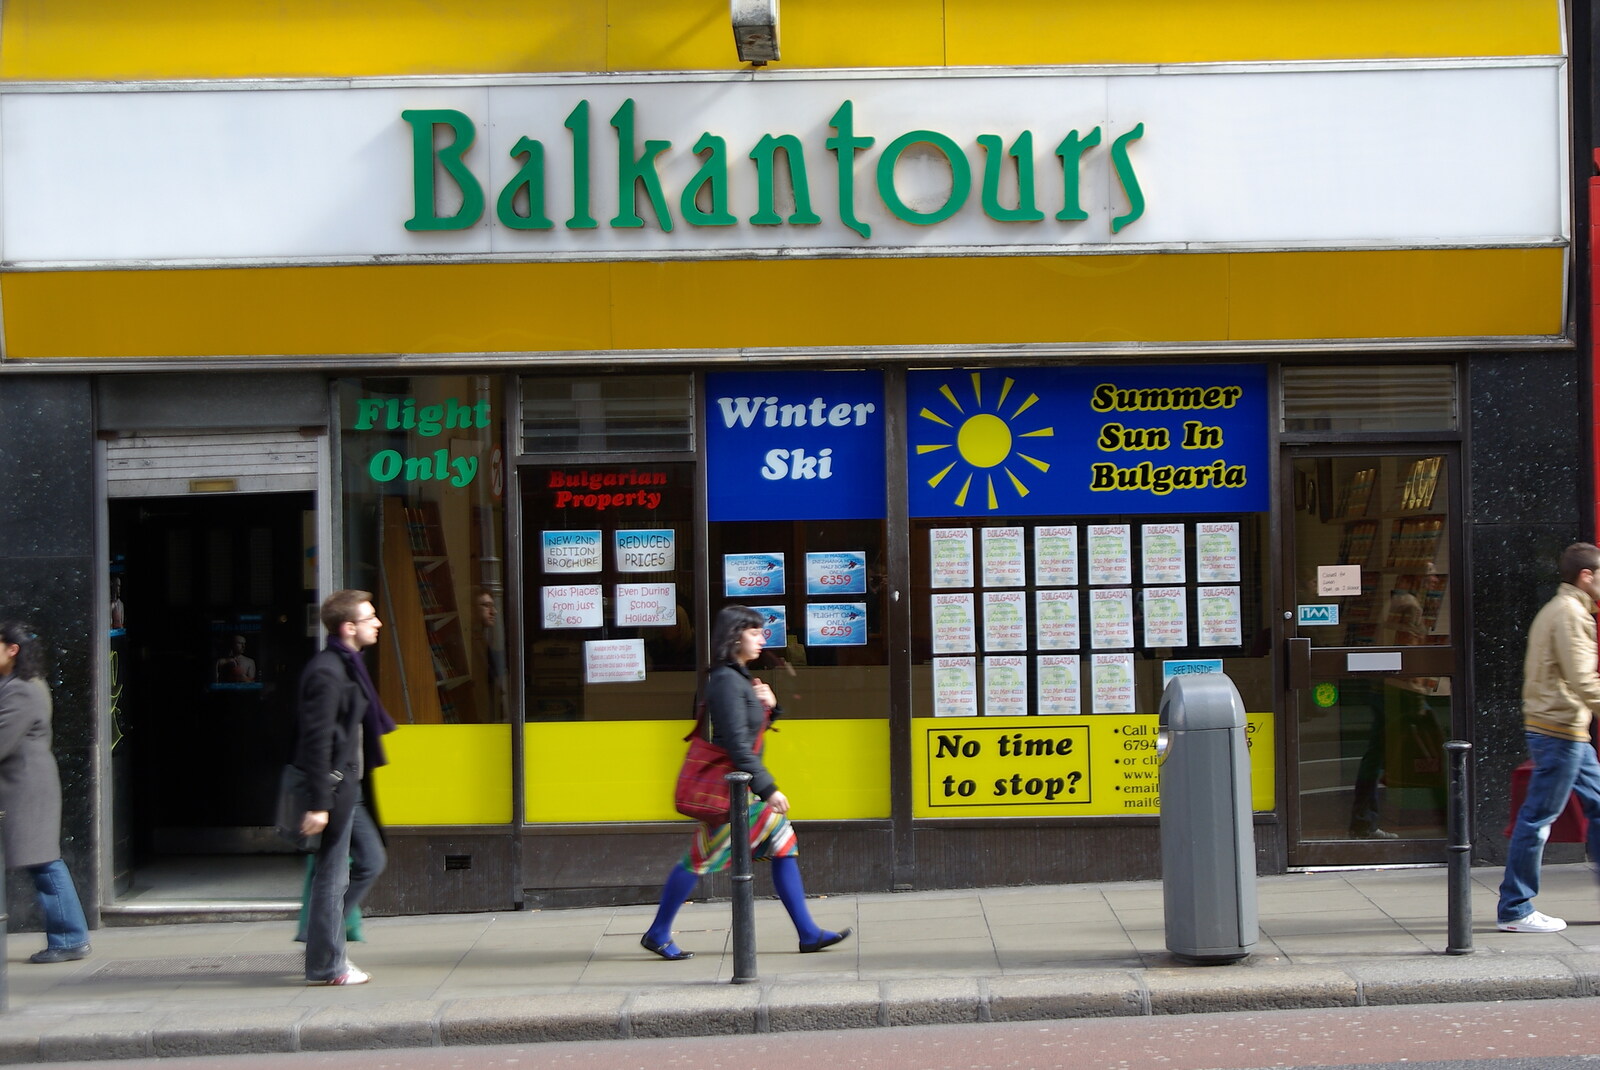 Easter in Dublin, Ireland - 21st March 2008: The 'Balkantours' shop isn't really appealing